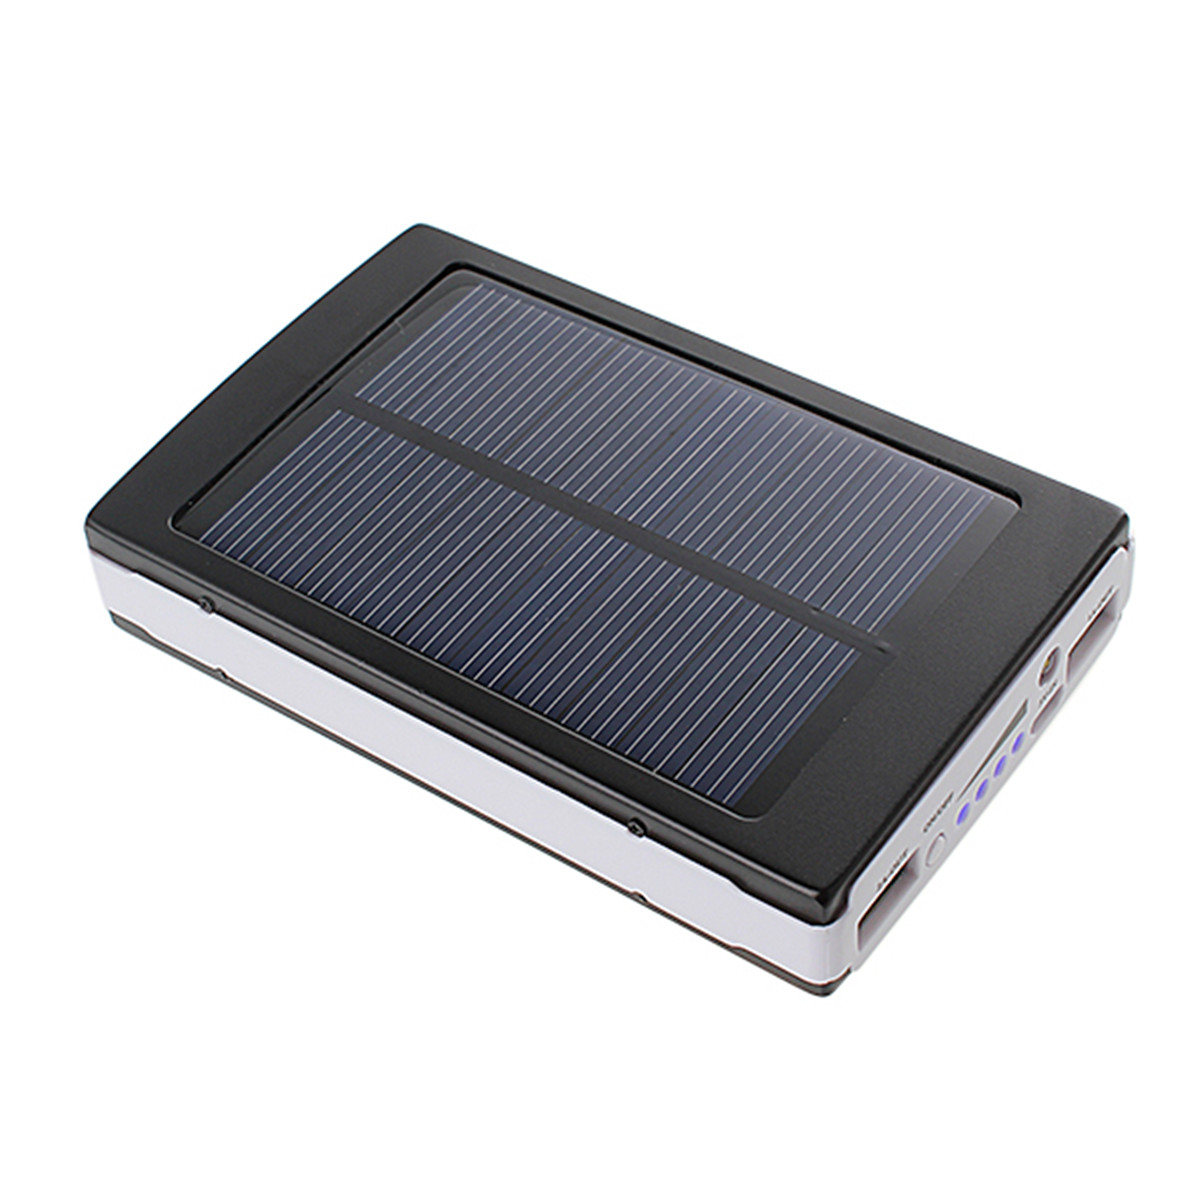 Portable-Solar-Panel-Dual-USB-External-Mobile-Battery-Power-Bank-Pack-Charger-for-iPhone-HTC-1419461-5